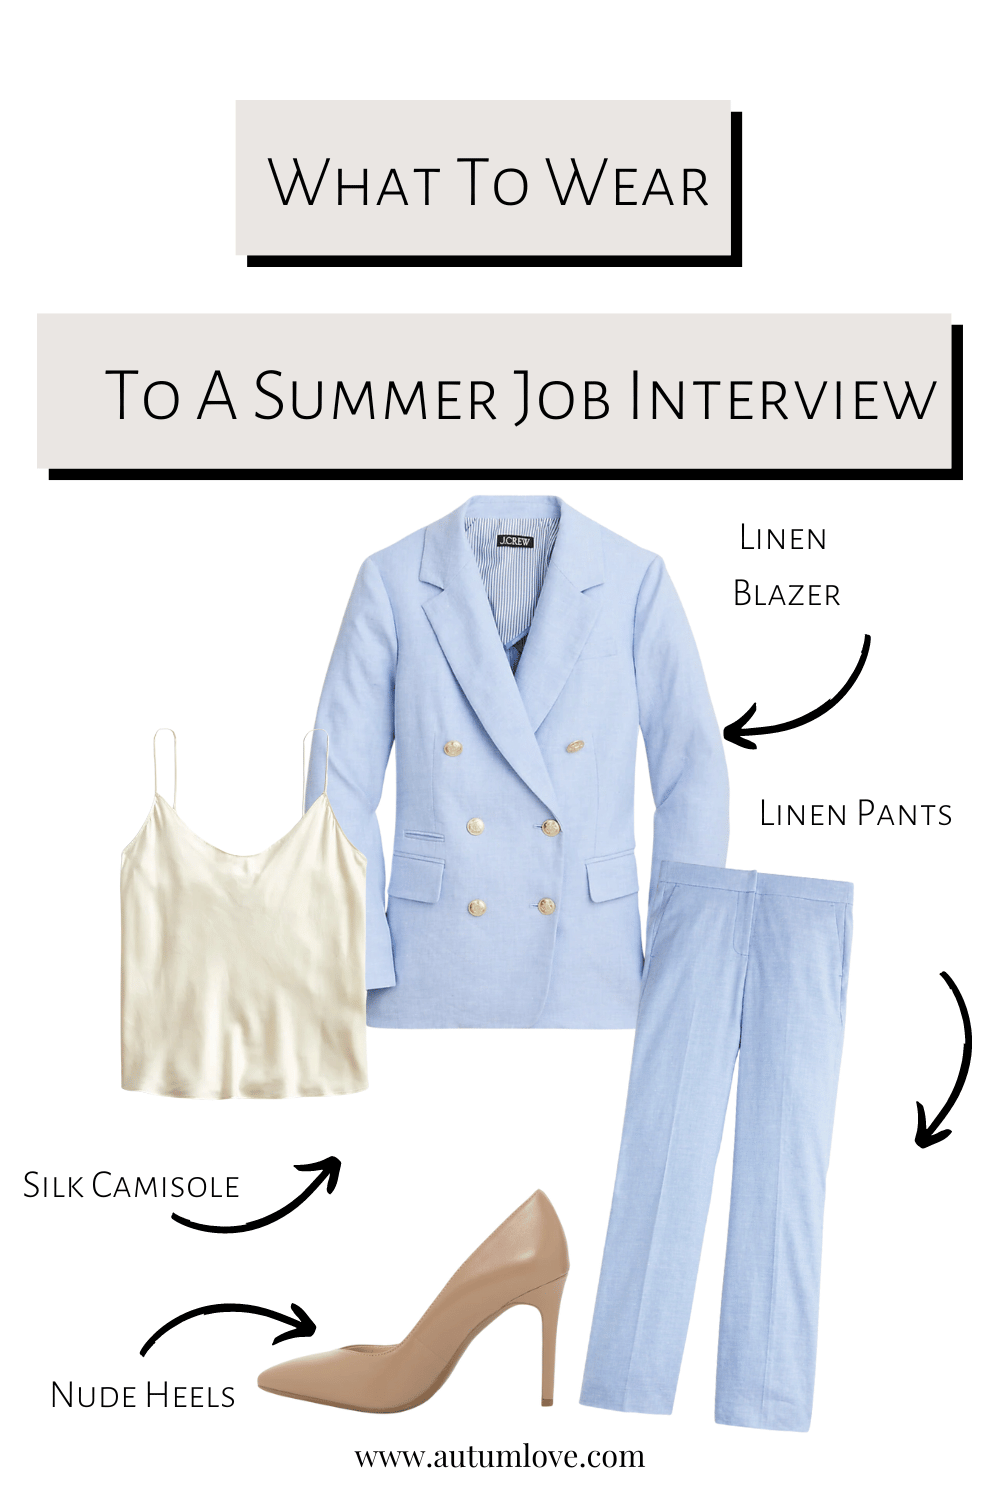 5 WALK-IN INTERVIEW OUTFIT IDEAS TO LEAVE A LASTING IMPRESSION